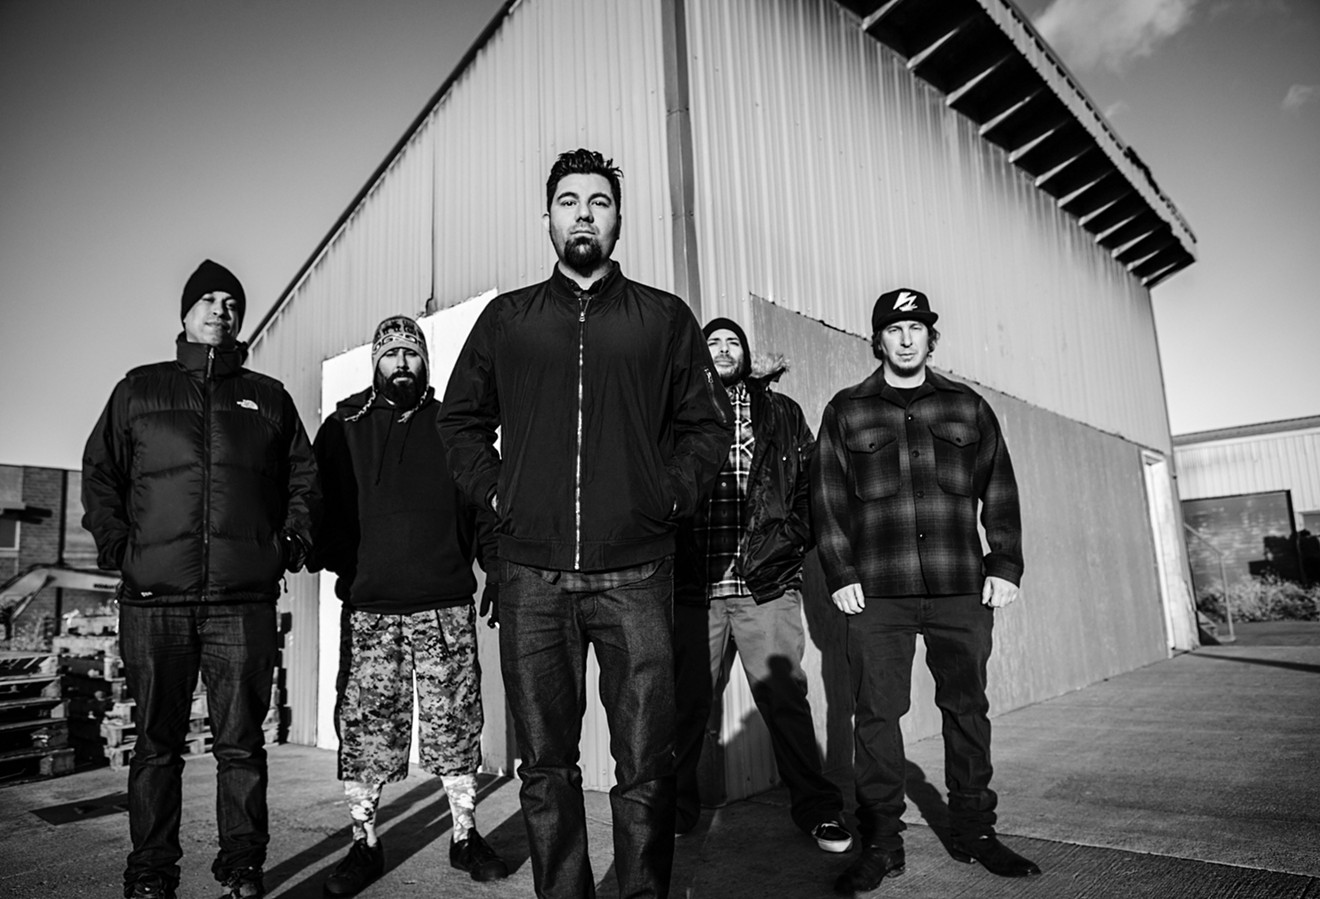 Deftones is coming to Ball Arena on Monday.